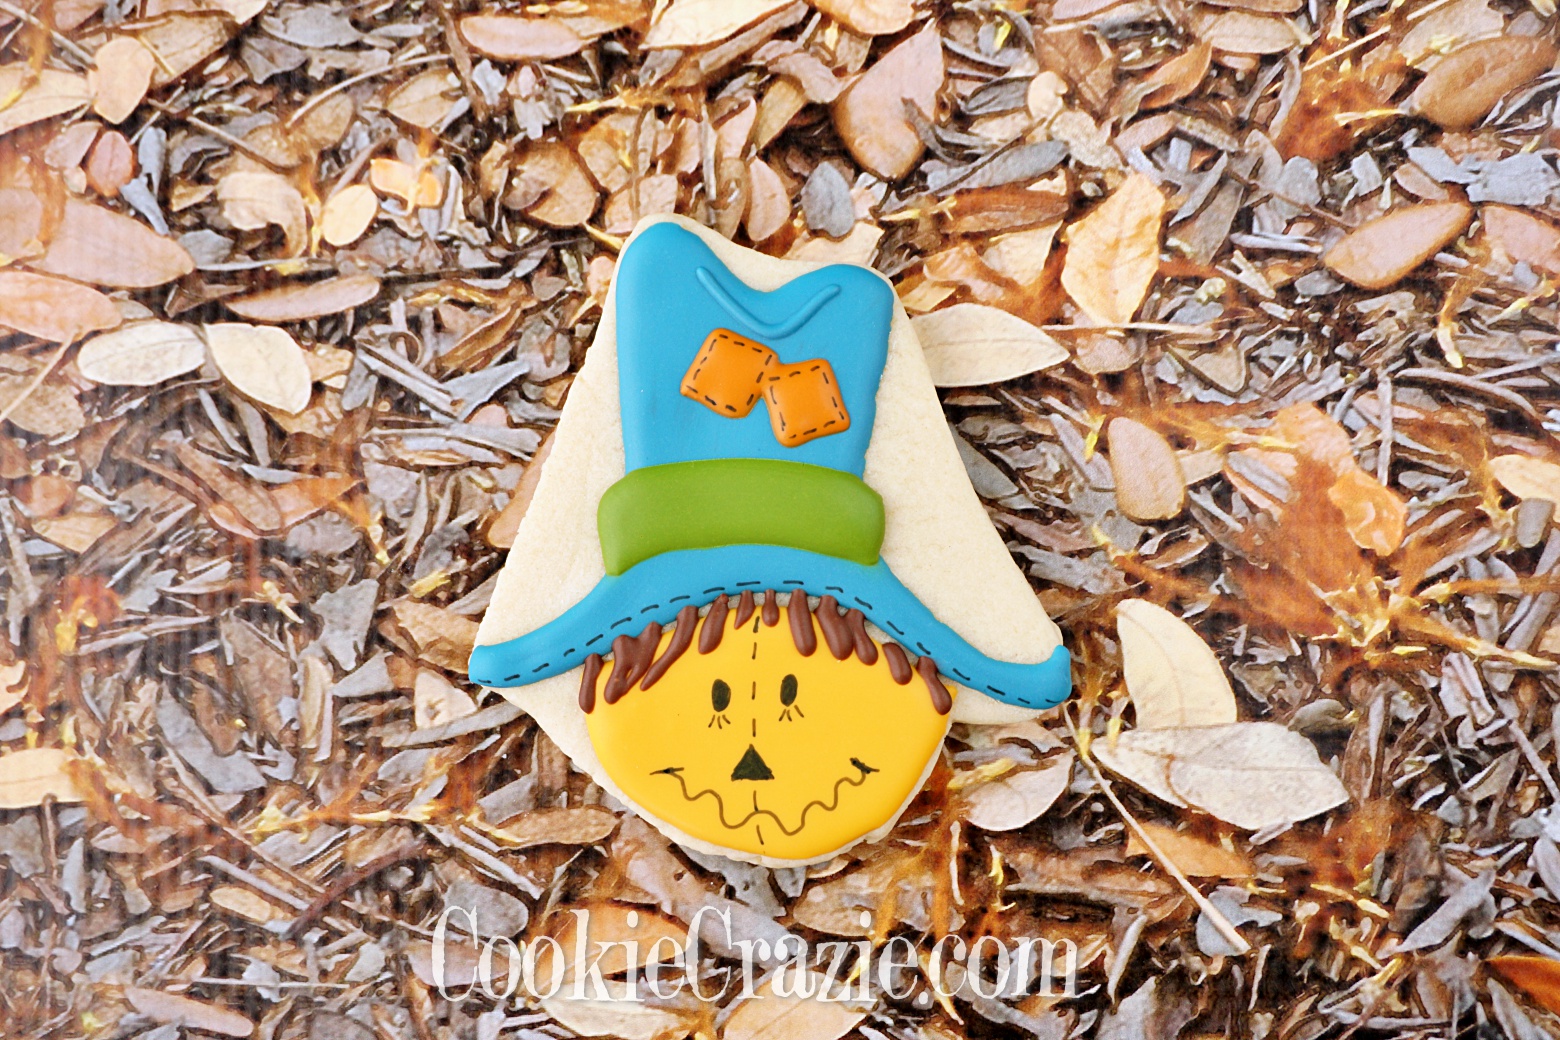  Autumn Scarecrow Decorated Sugar Cookie YouTube video  HERE  